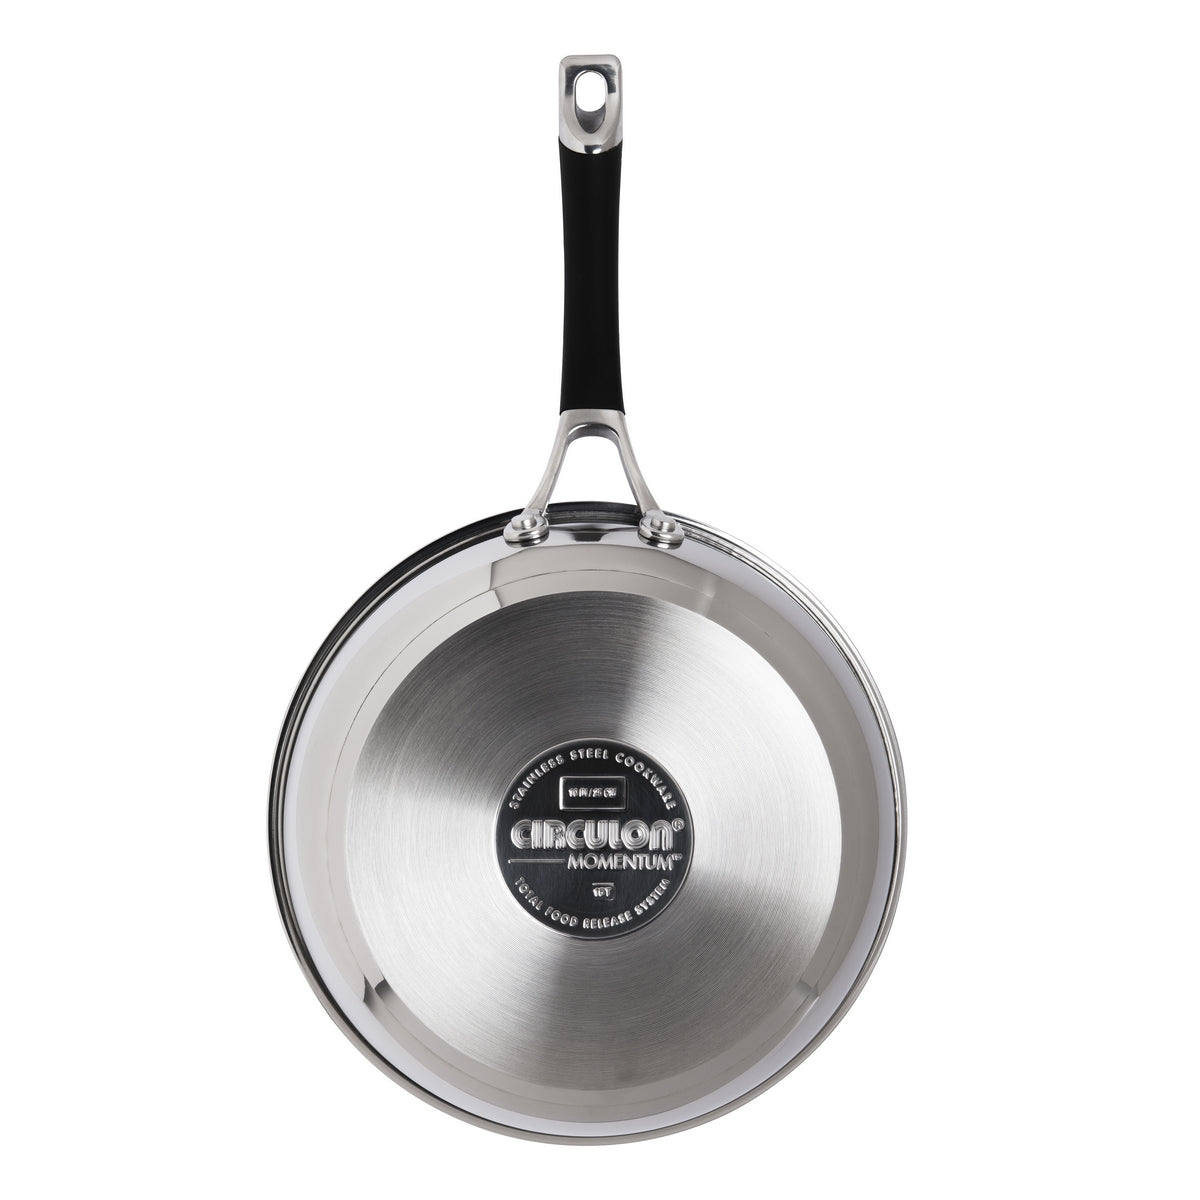 Momentum stainless steel frying pan has an edge to edge induction suitable base for all hob types